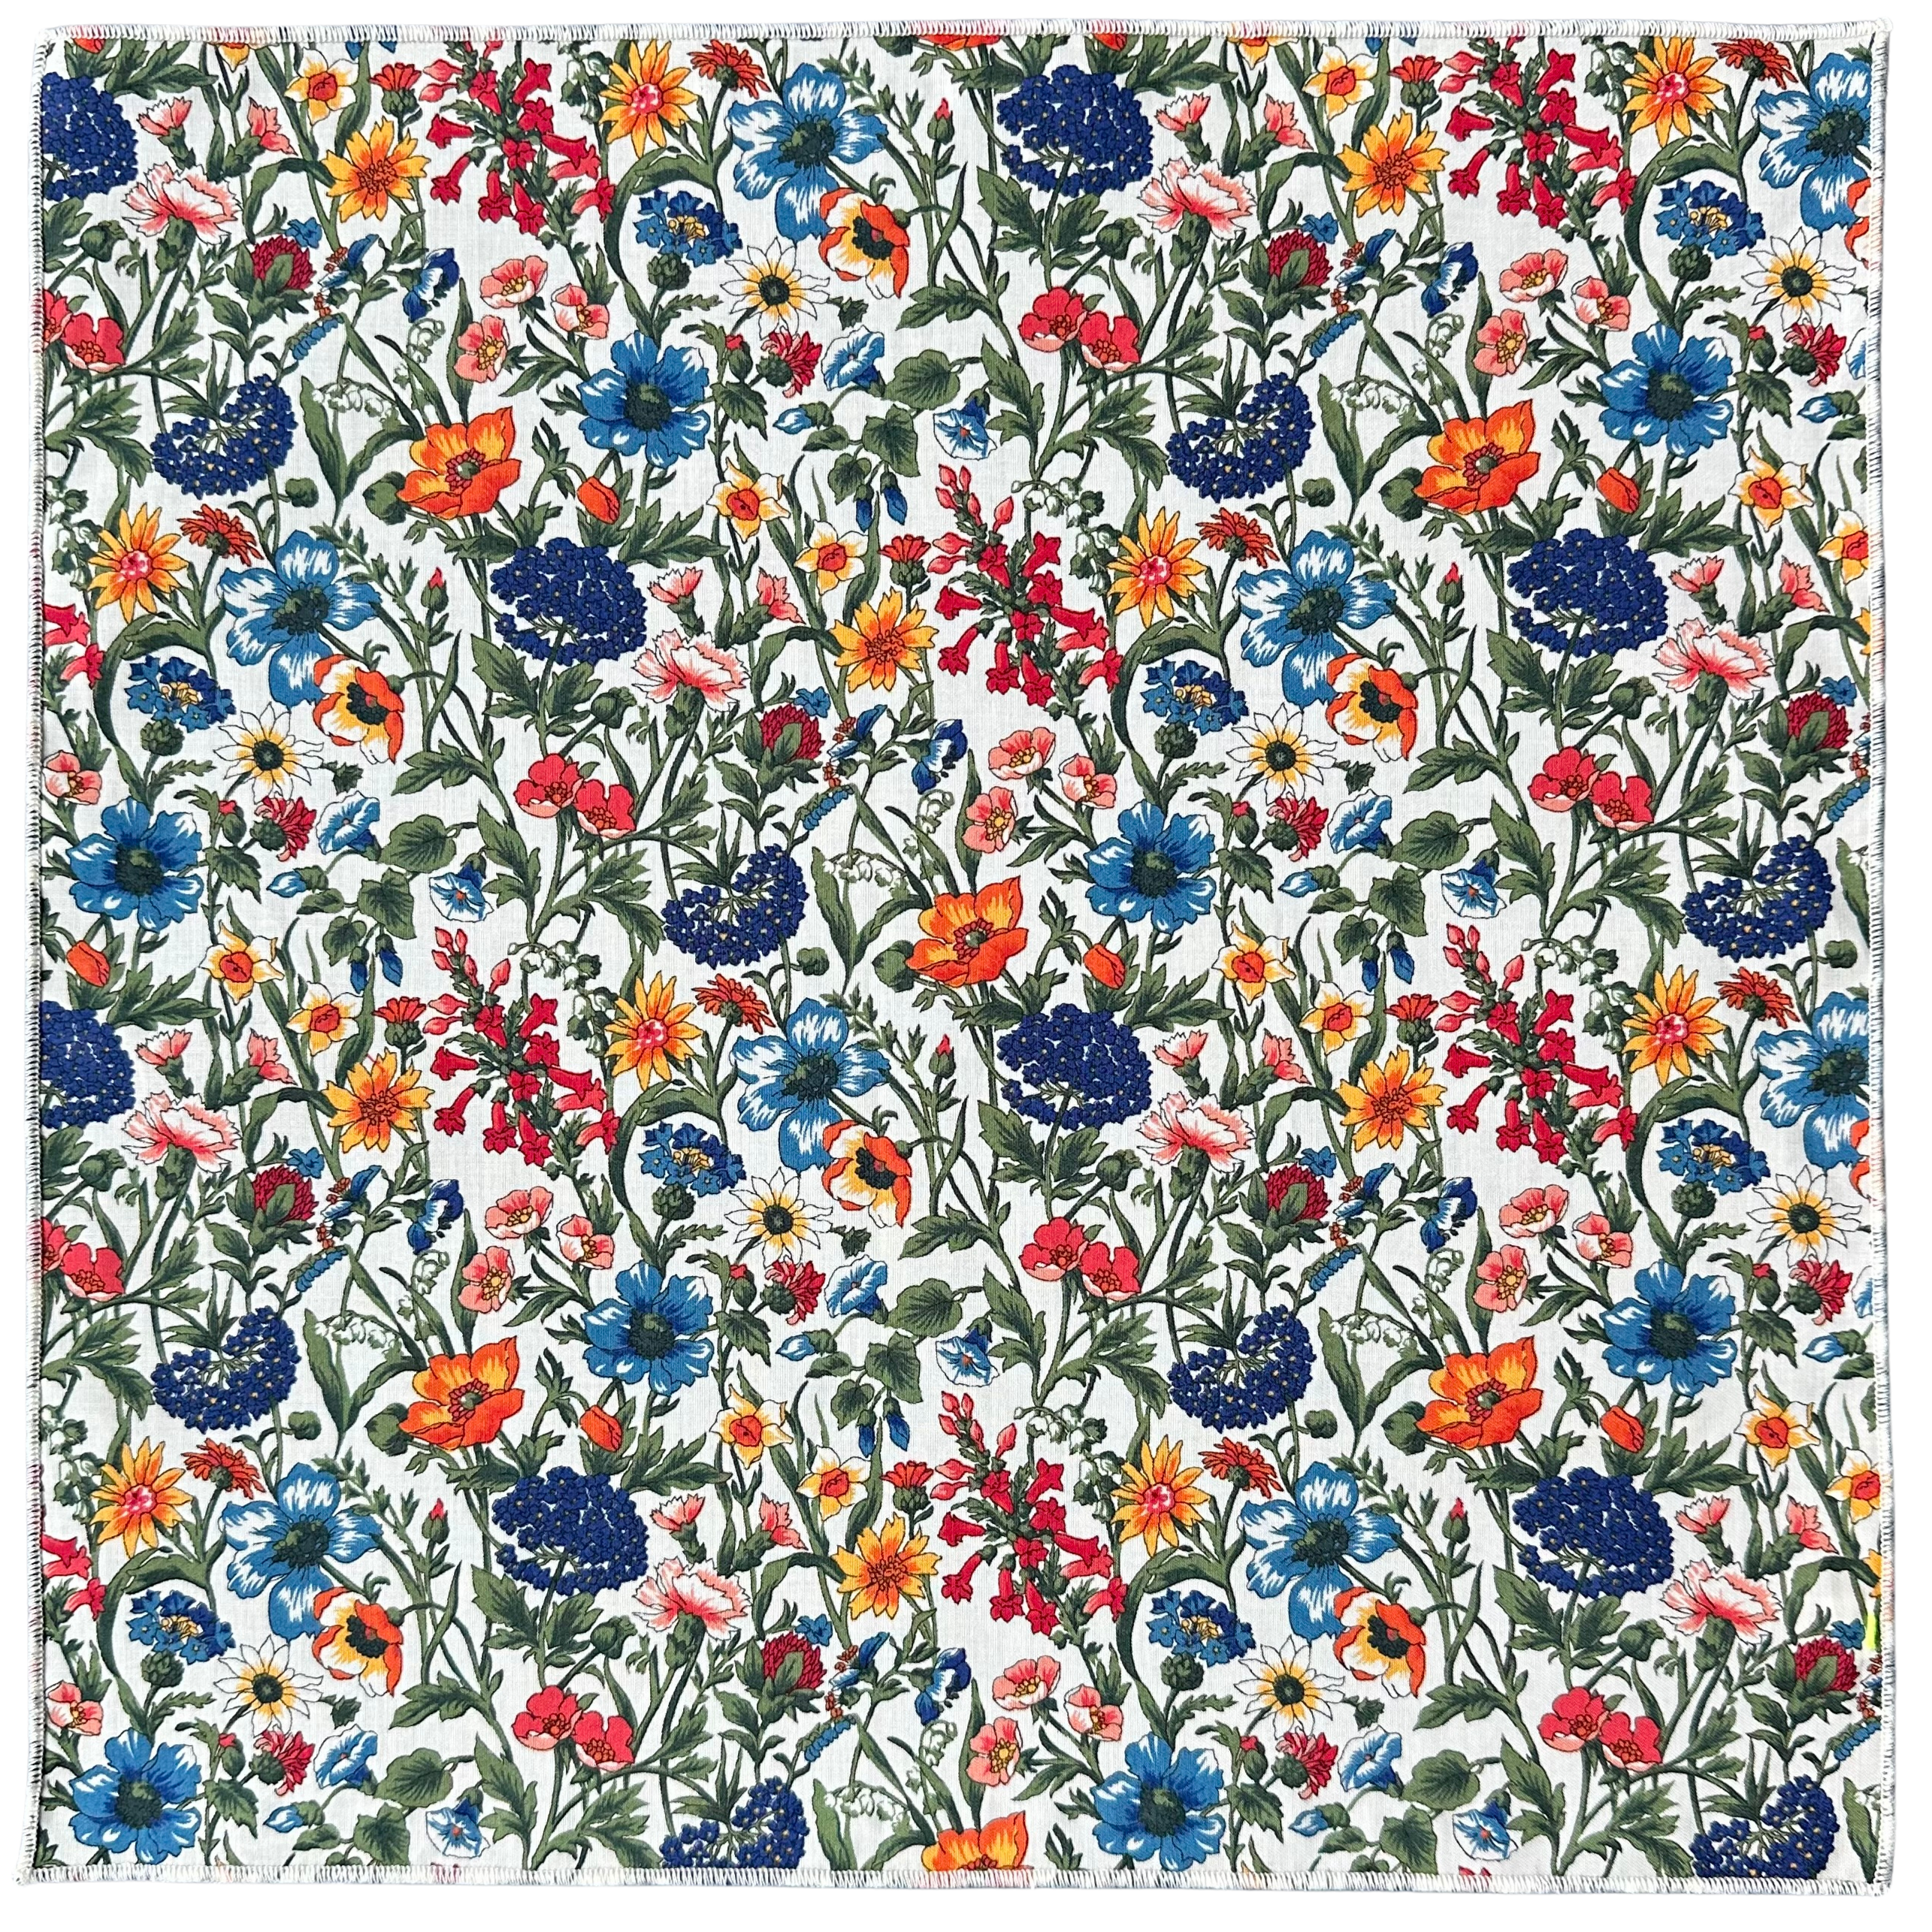 Wildside multicolour floral pocket square made in Canada